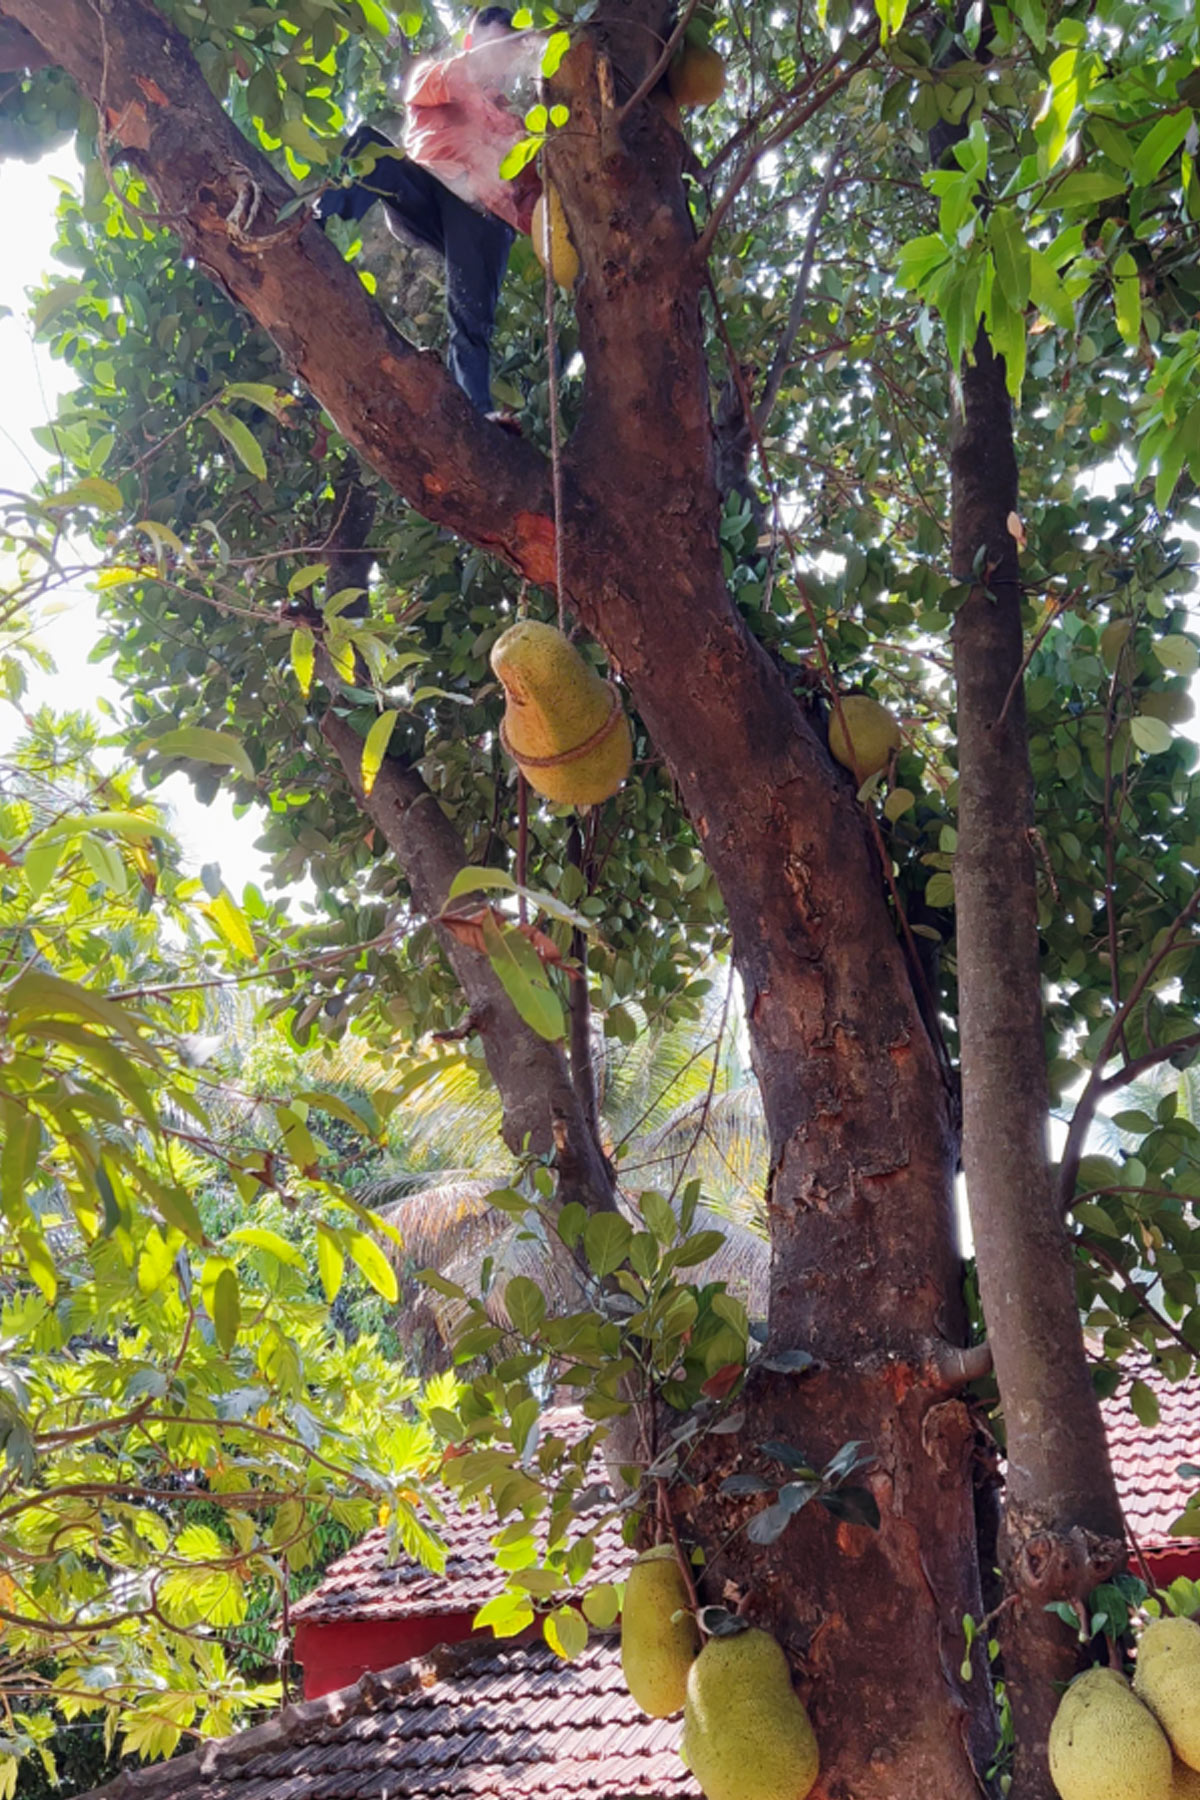 Harvesting method of a jackfruit from a tall tree